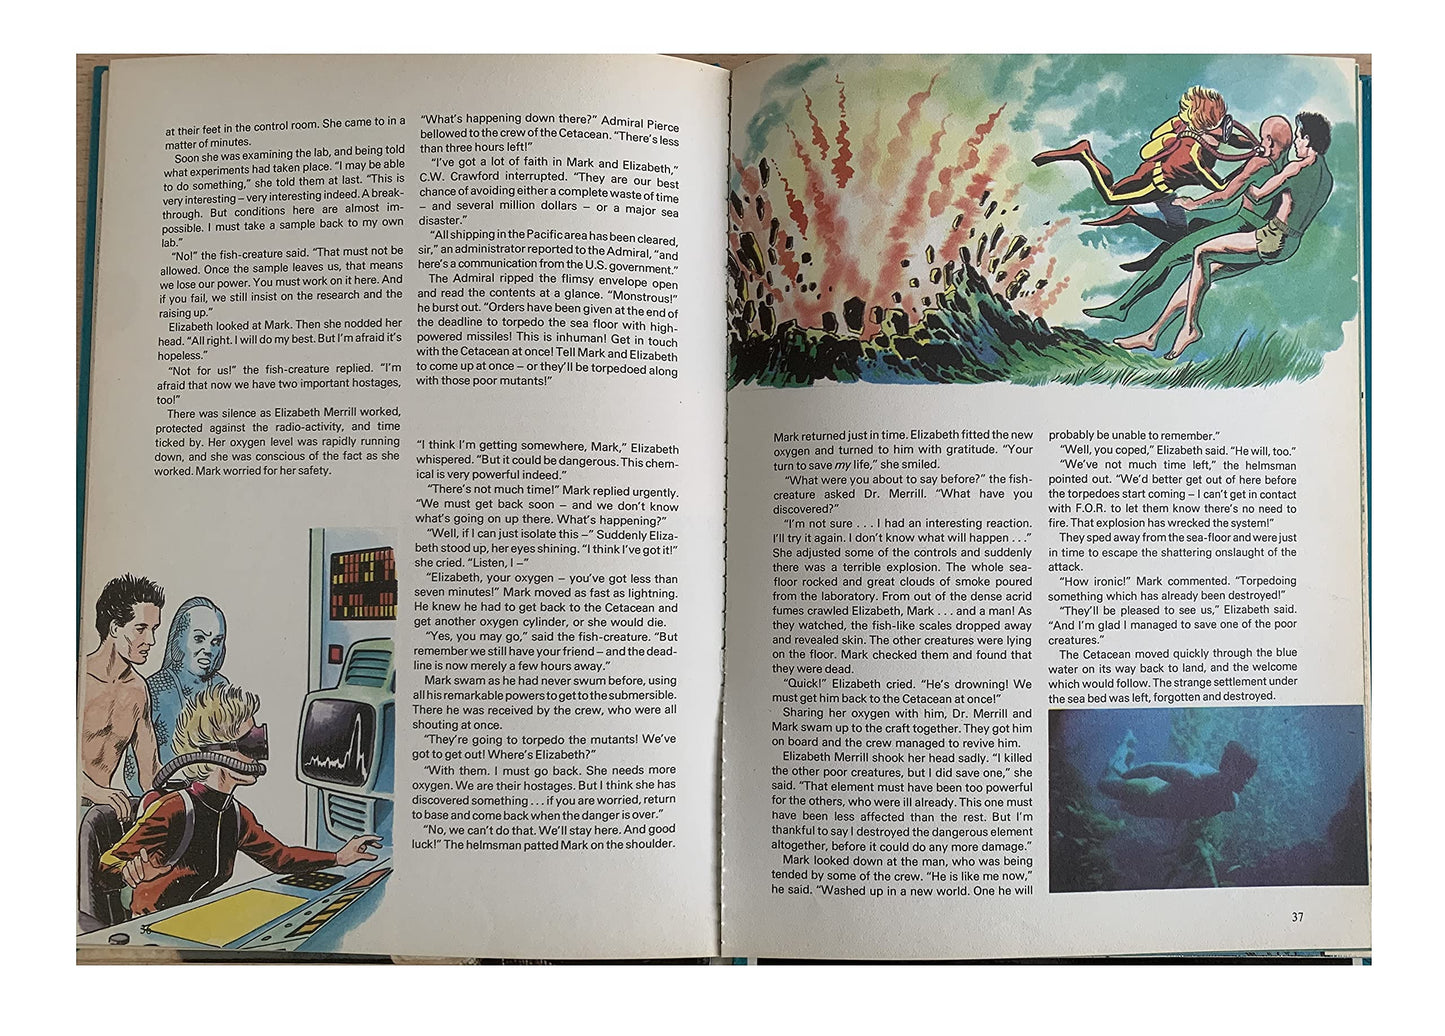 Vintage The Man From Atlantis Annual 1979 - Unsold Shop Stock